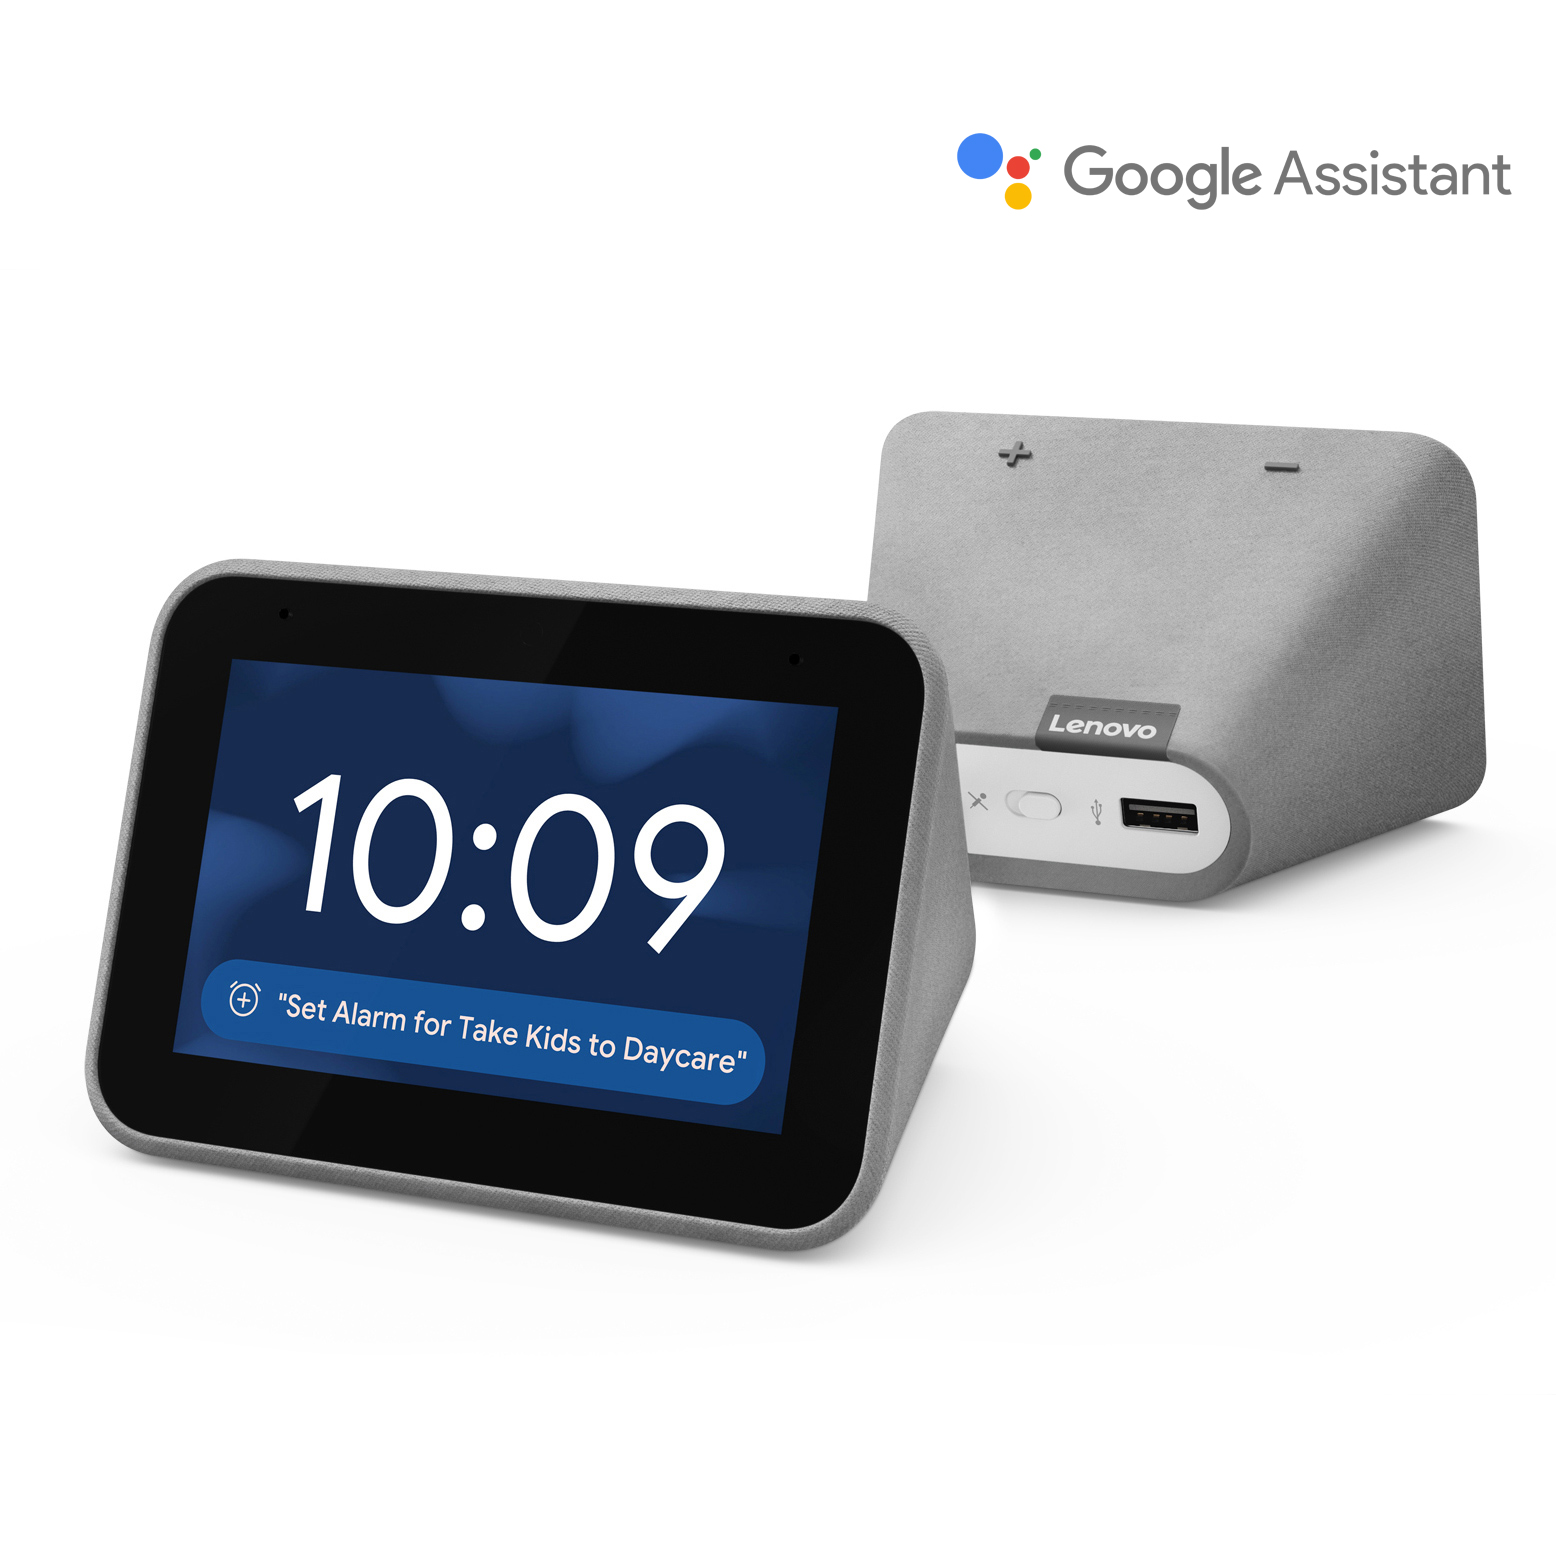 Lenovo Smart Clock with Google Assistant - image 1 of 6